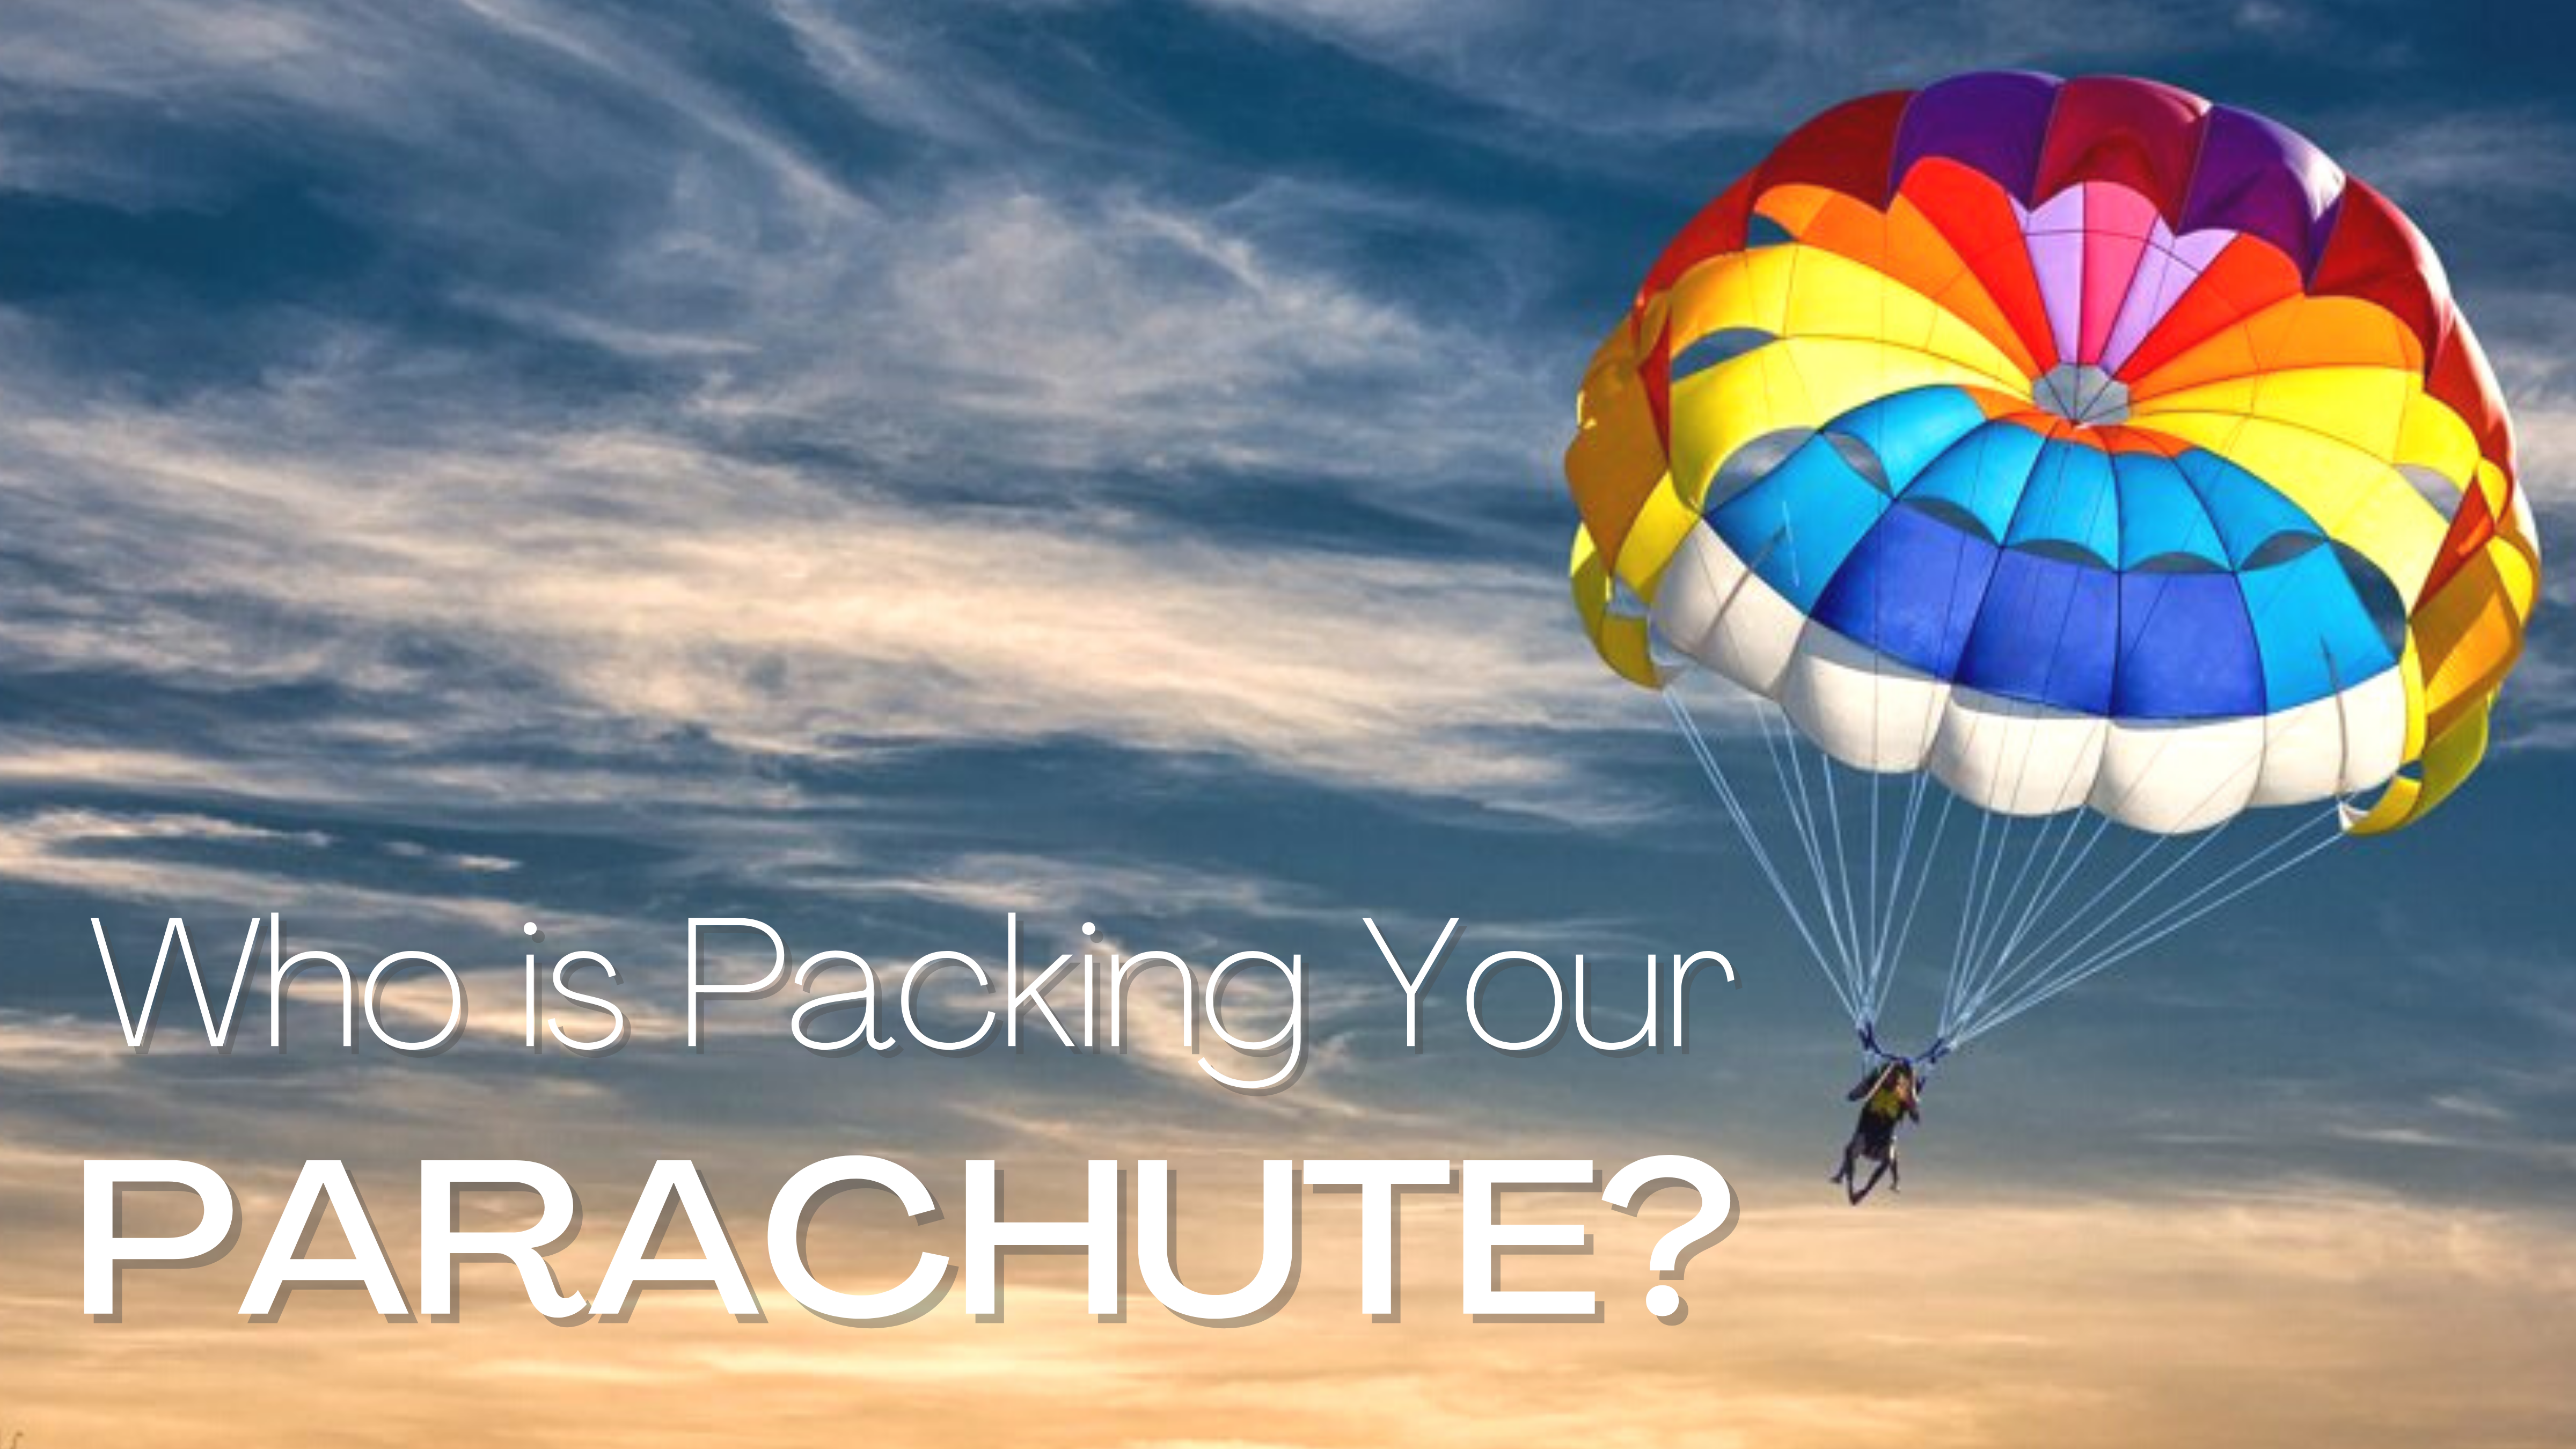 Who is Packing Your Parachute?